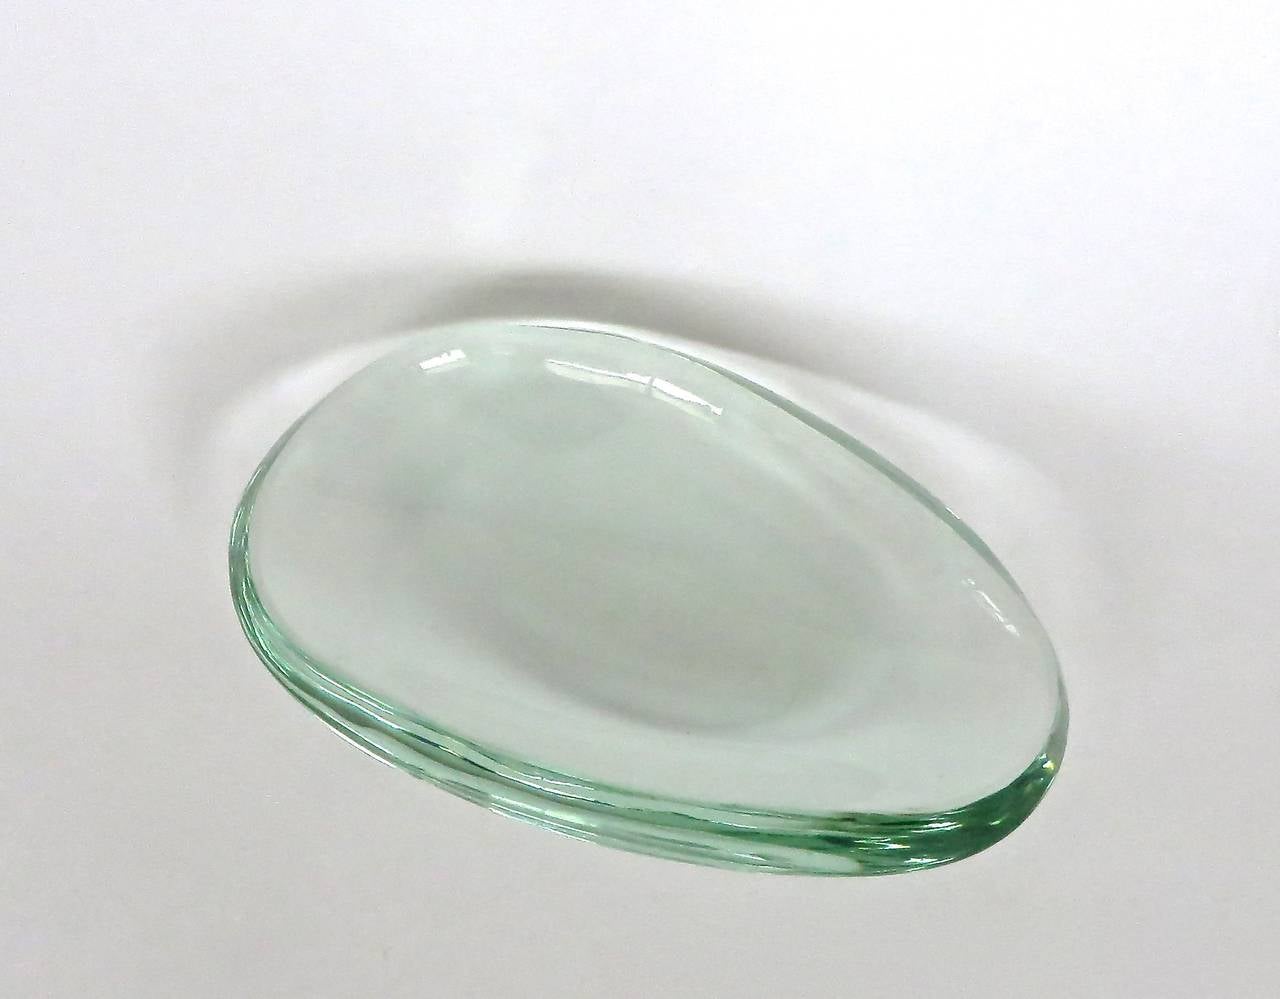 Italian elongated oval glass dish or vide poche by Fontana Arte. Iconic thick glass in excellent condition. Some evidence of use on bottom of dish.